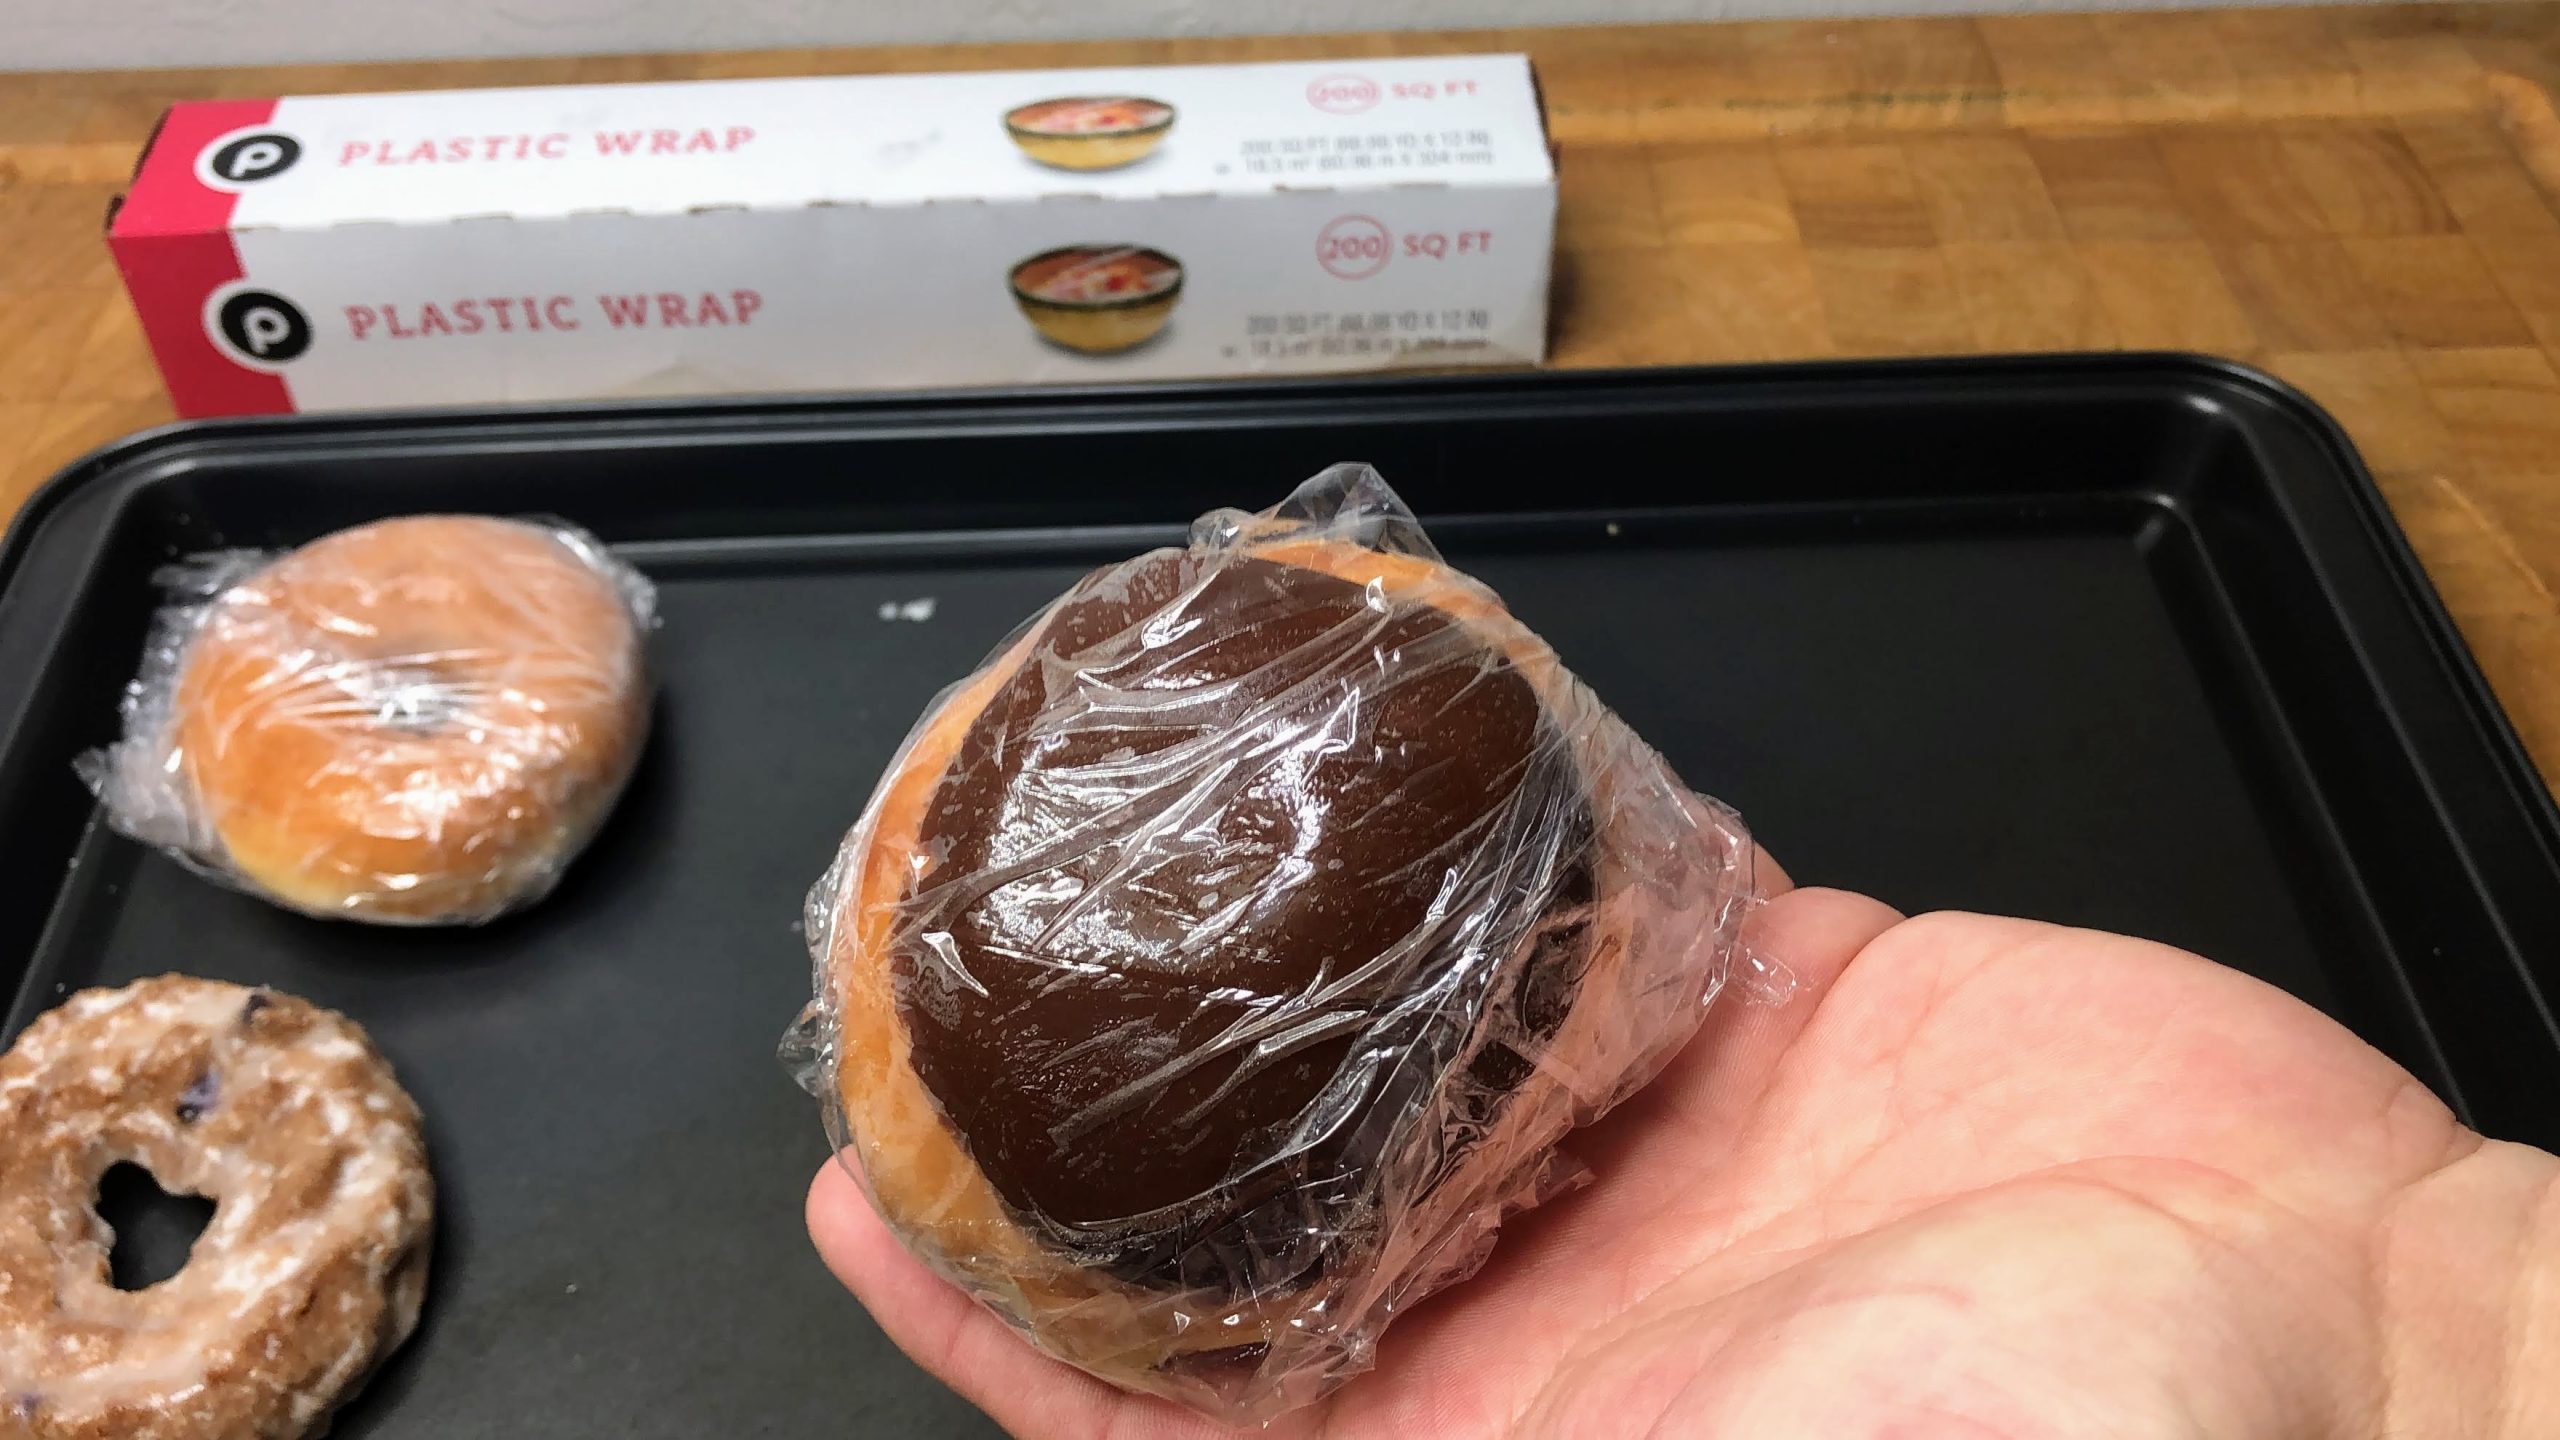 chocolate iced and filled krispy kreme doughnut wrapped in plastic wrap